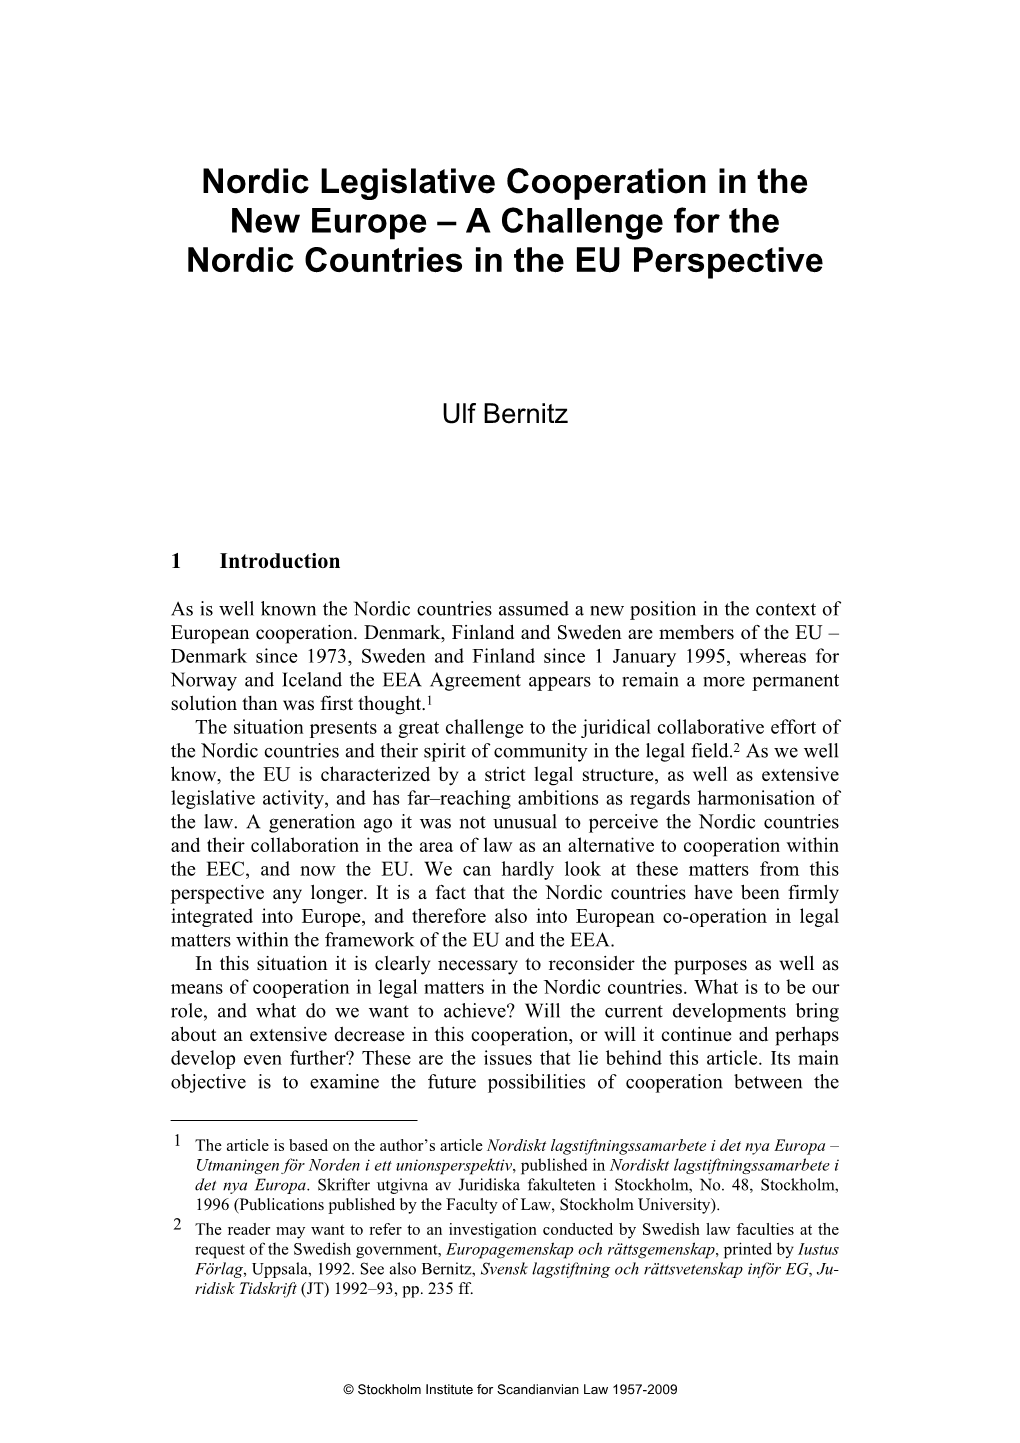 Nordic Legislative Cooperation in the New Europe – a Challenge for the Nordic Countries in the EU Perspective